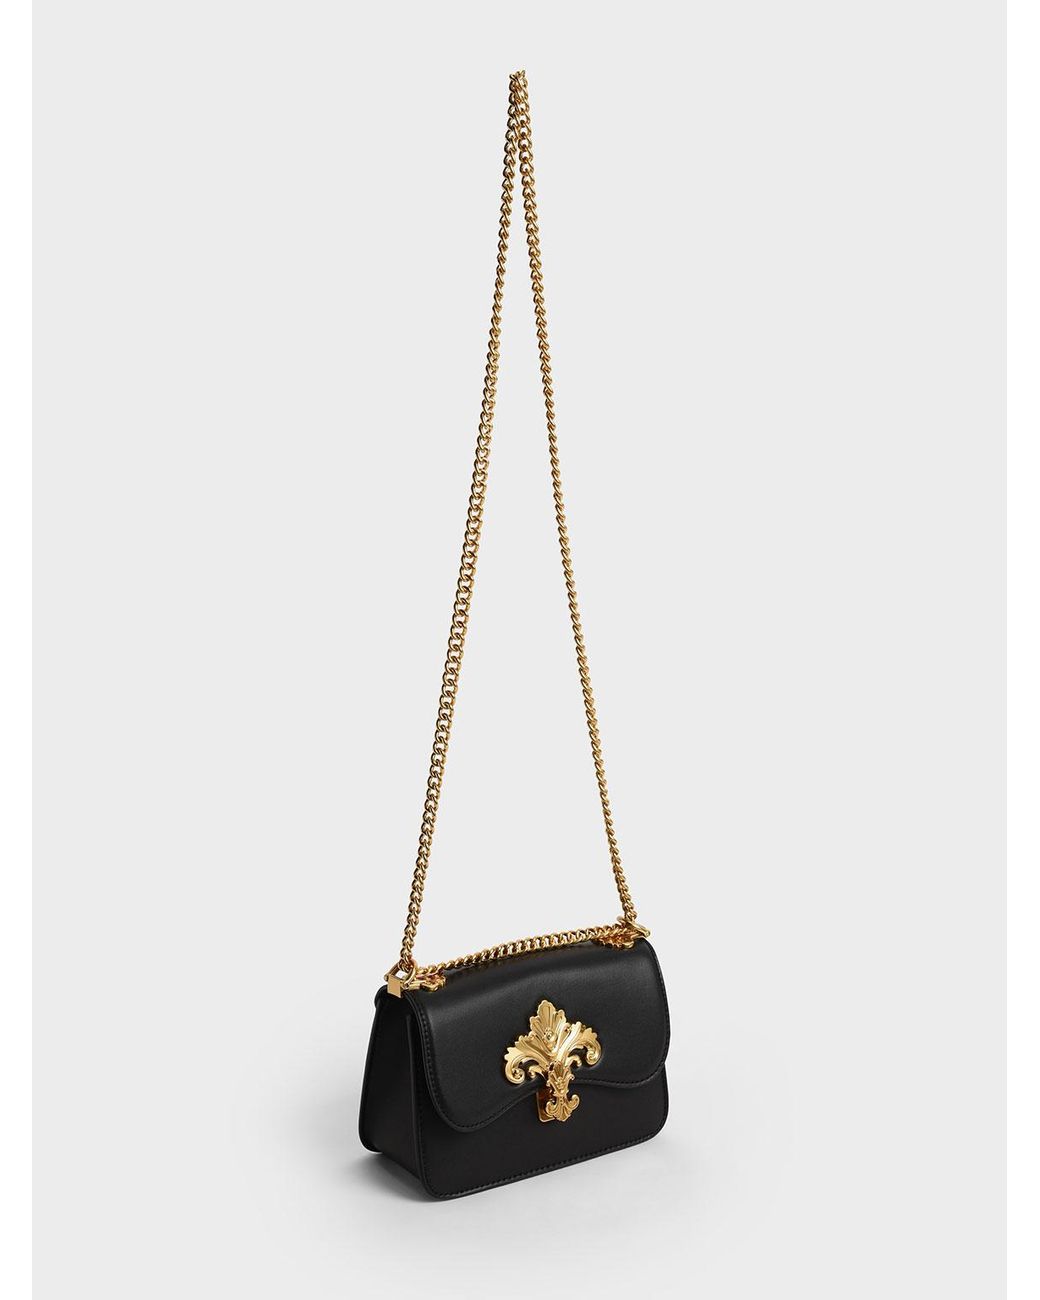 crossbody bag with chain strap